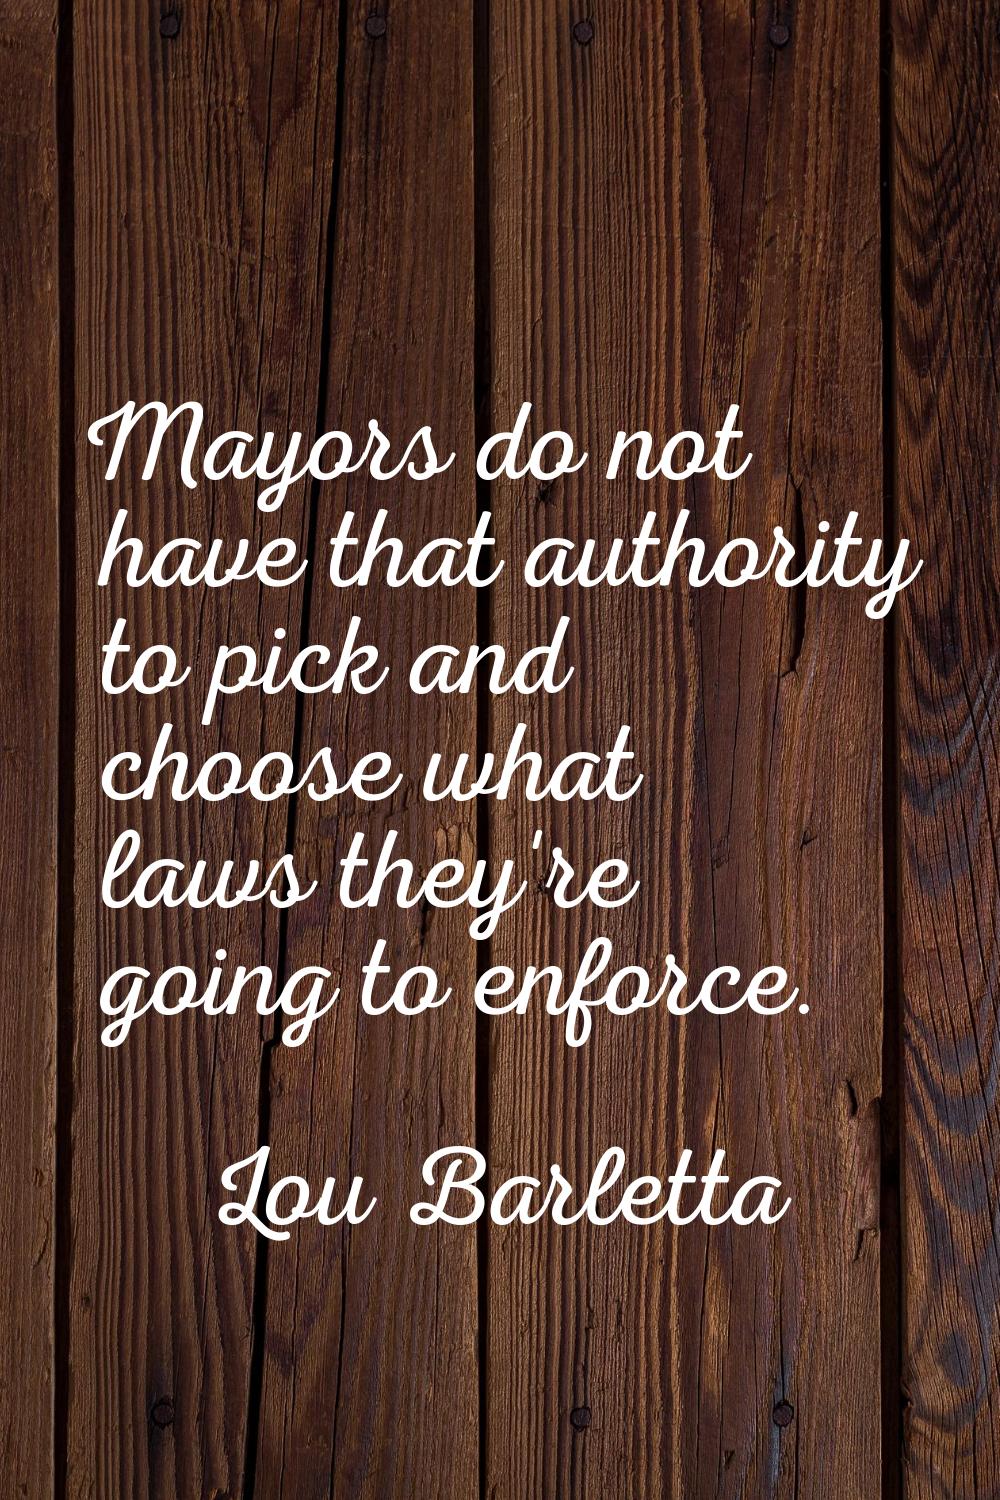 Mayors do not have that authority to pick and choose what laws they're going to enforce.